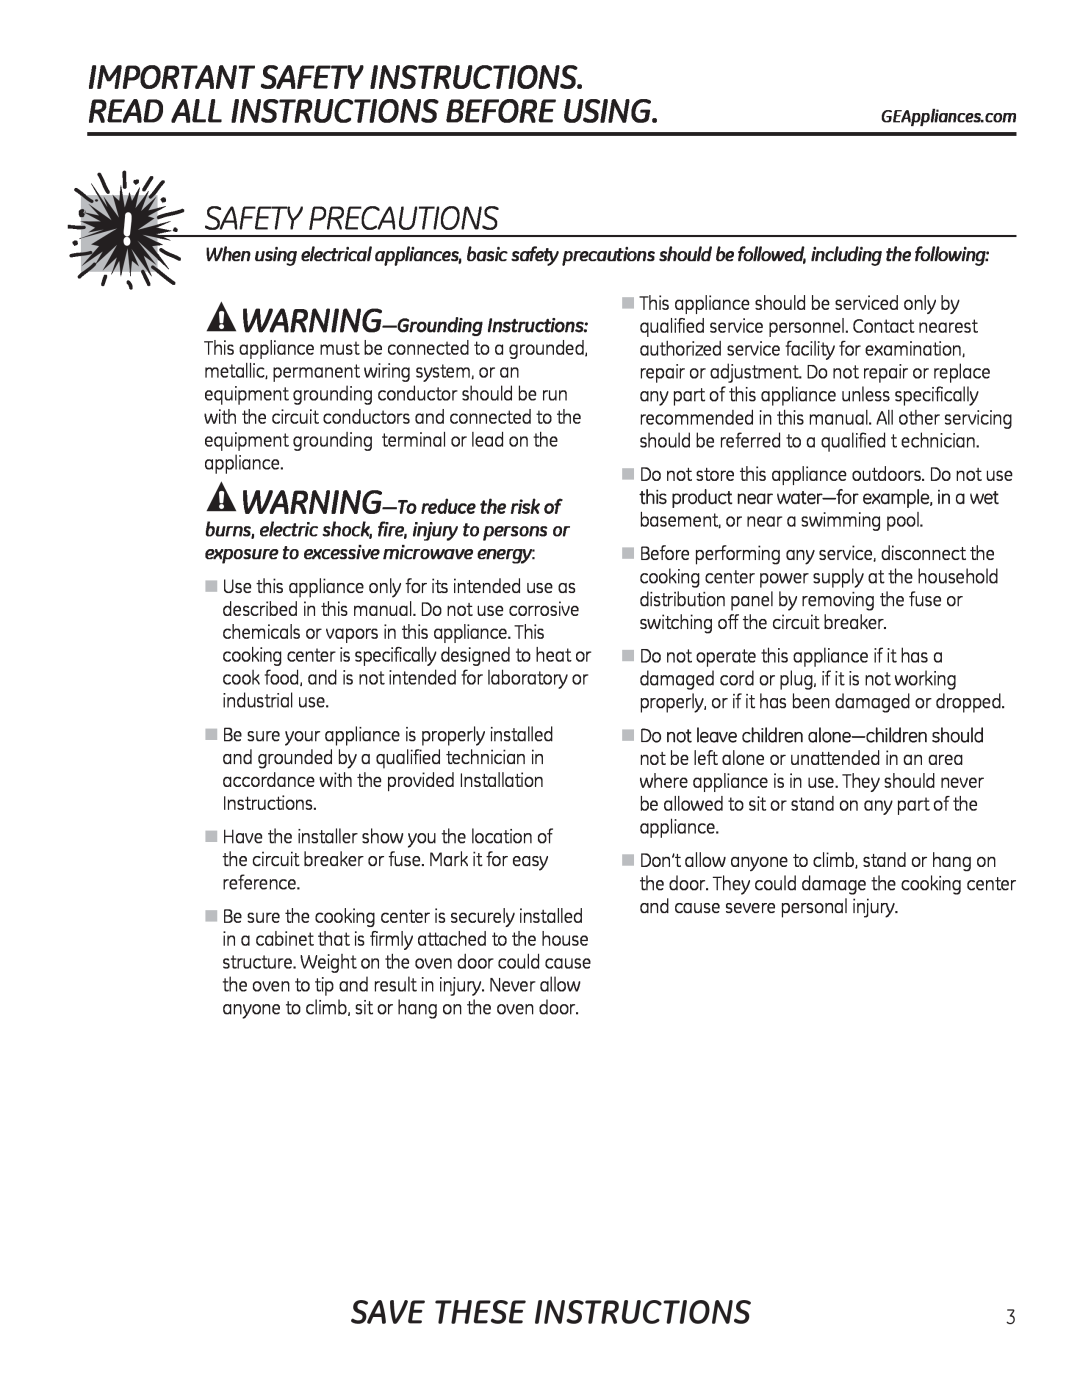 GE JTP90 Safety Precautions, Save These Instructions, Important Safety Instructions, Read All Instructions Before Using 